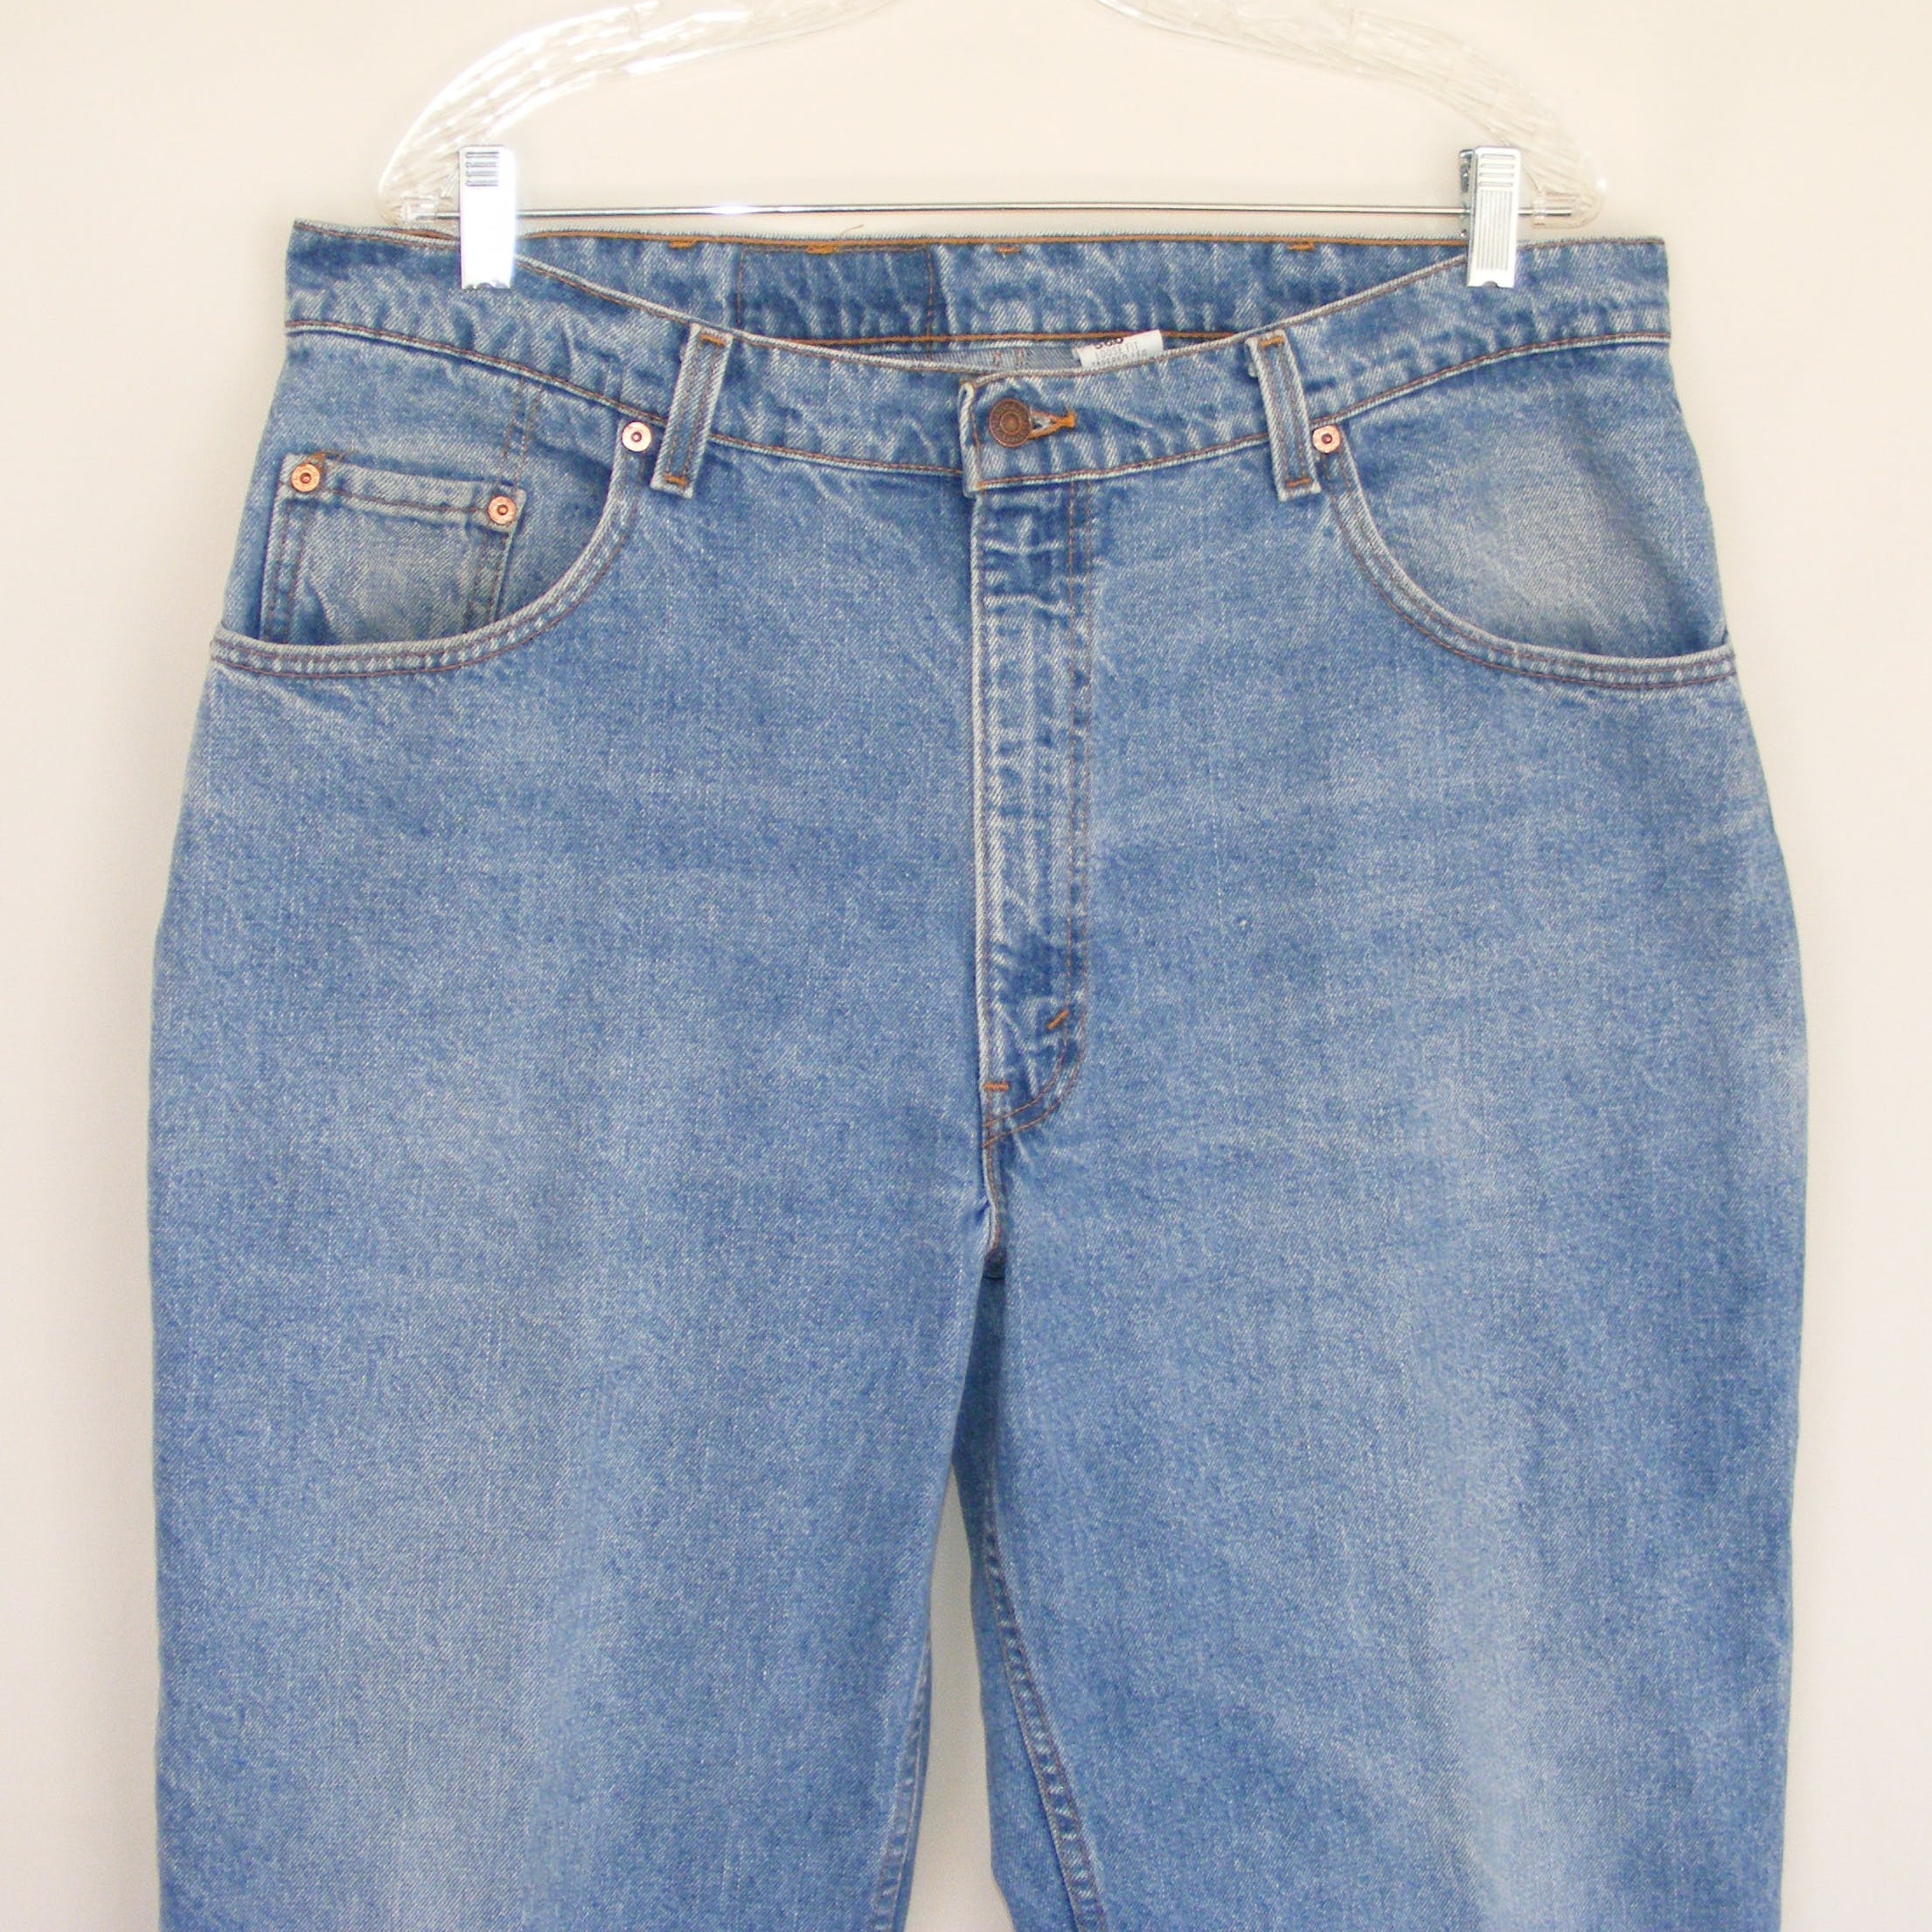 Vintage 80's Medium Wash Loose Fit Tapered Legged Jeans by Levi's ...